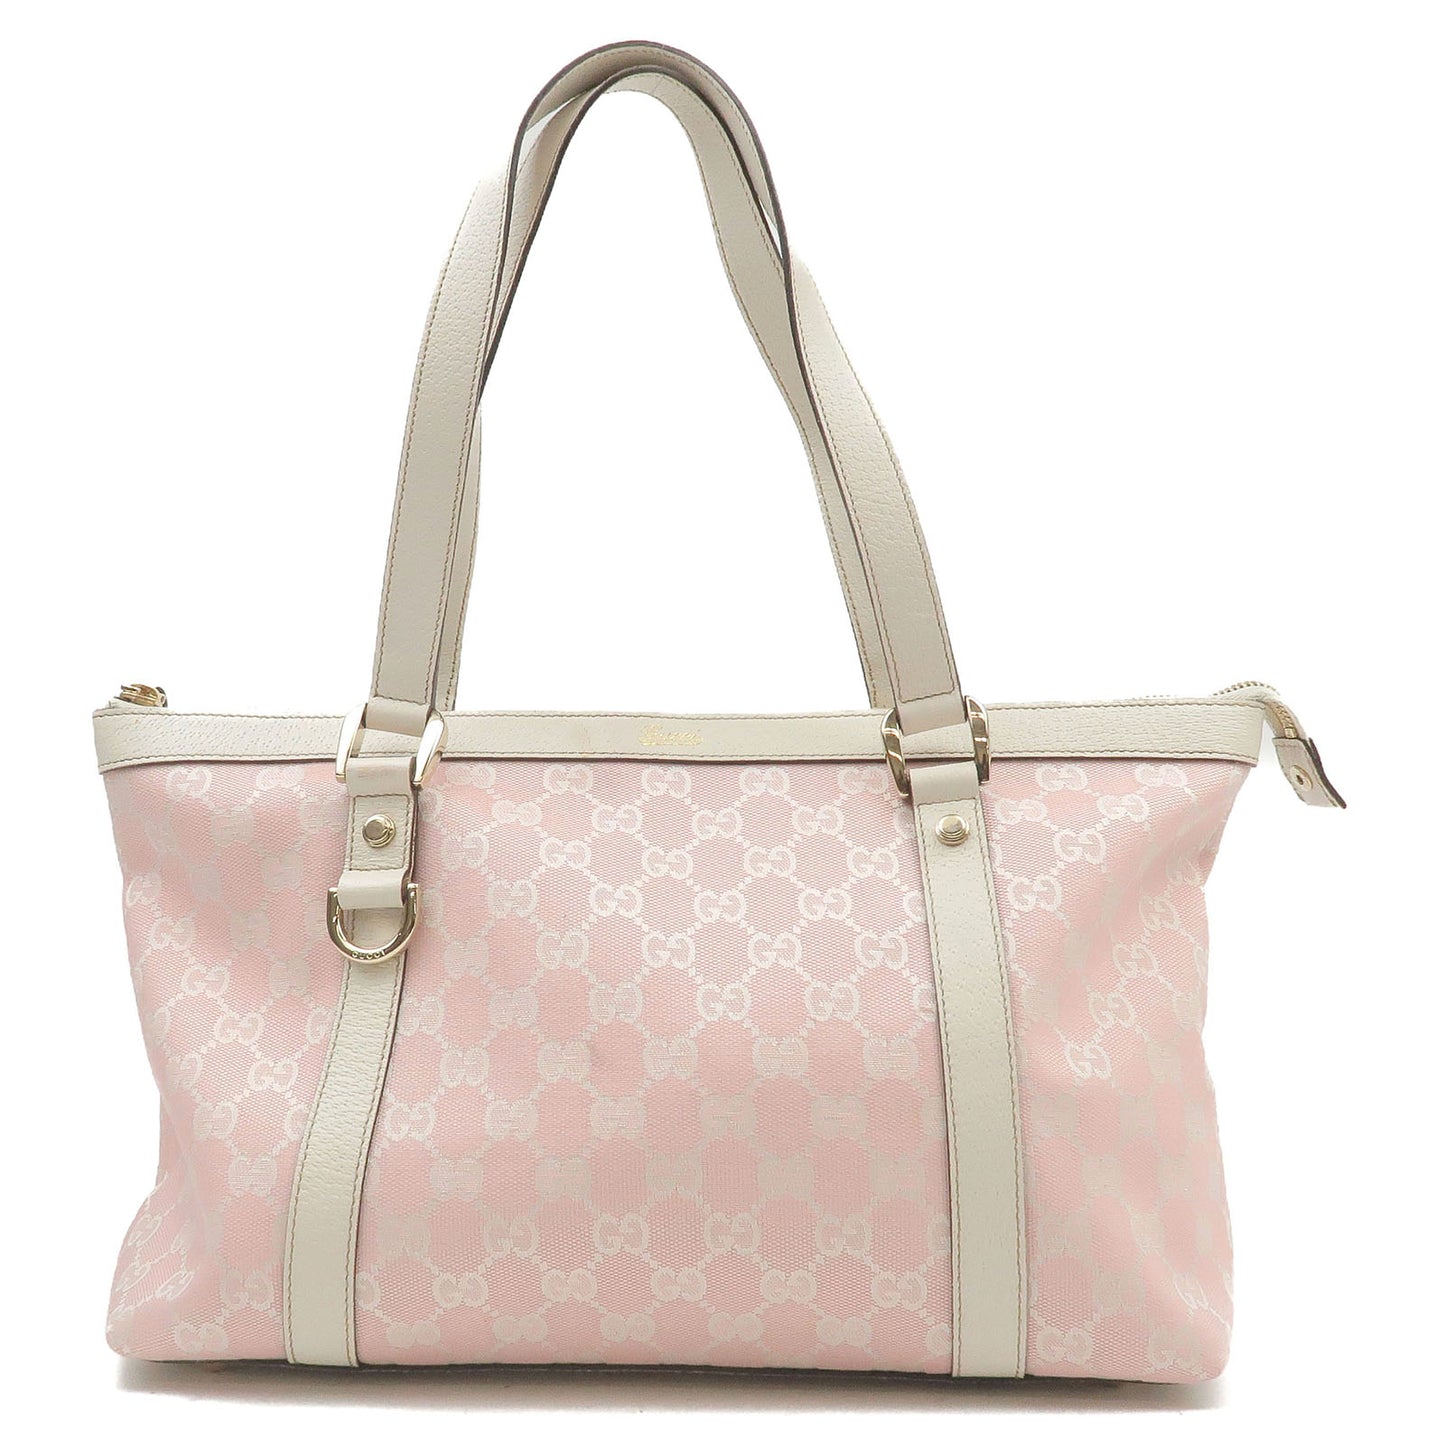 GUCCI-GG-Canvas-Leather-Tote-Bag-Pink-White-141470